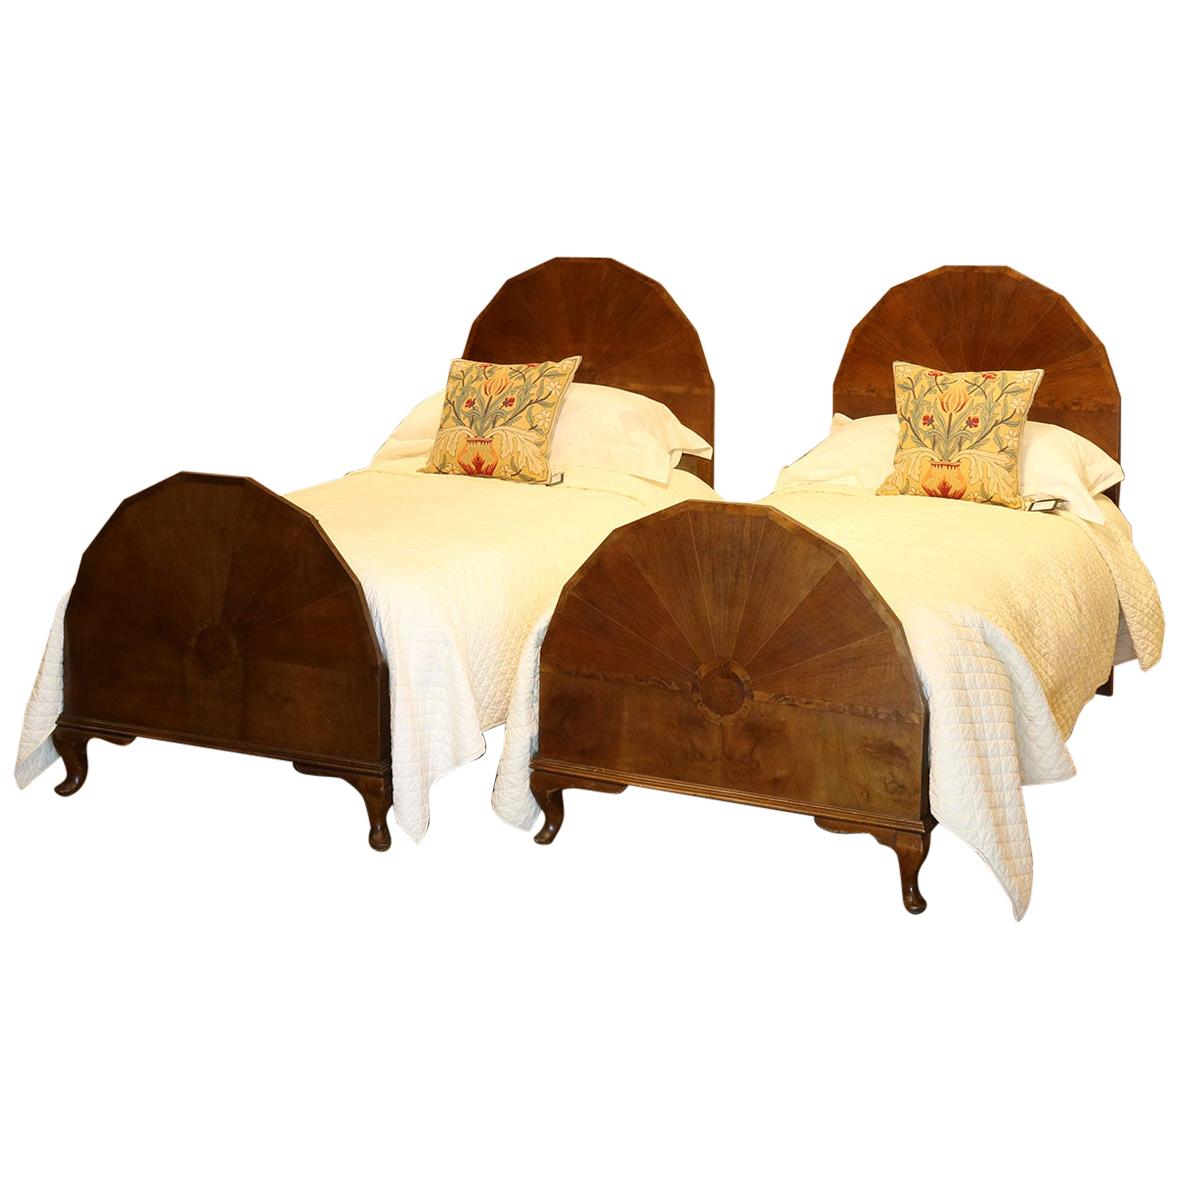 Matching Pair of Beds WP25